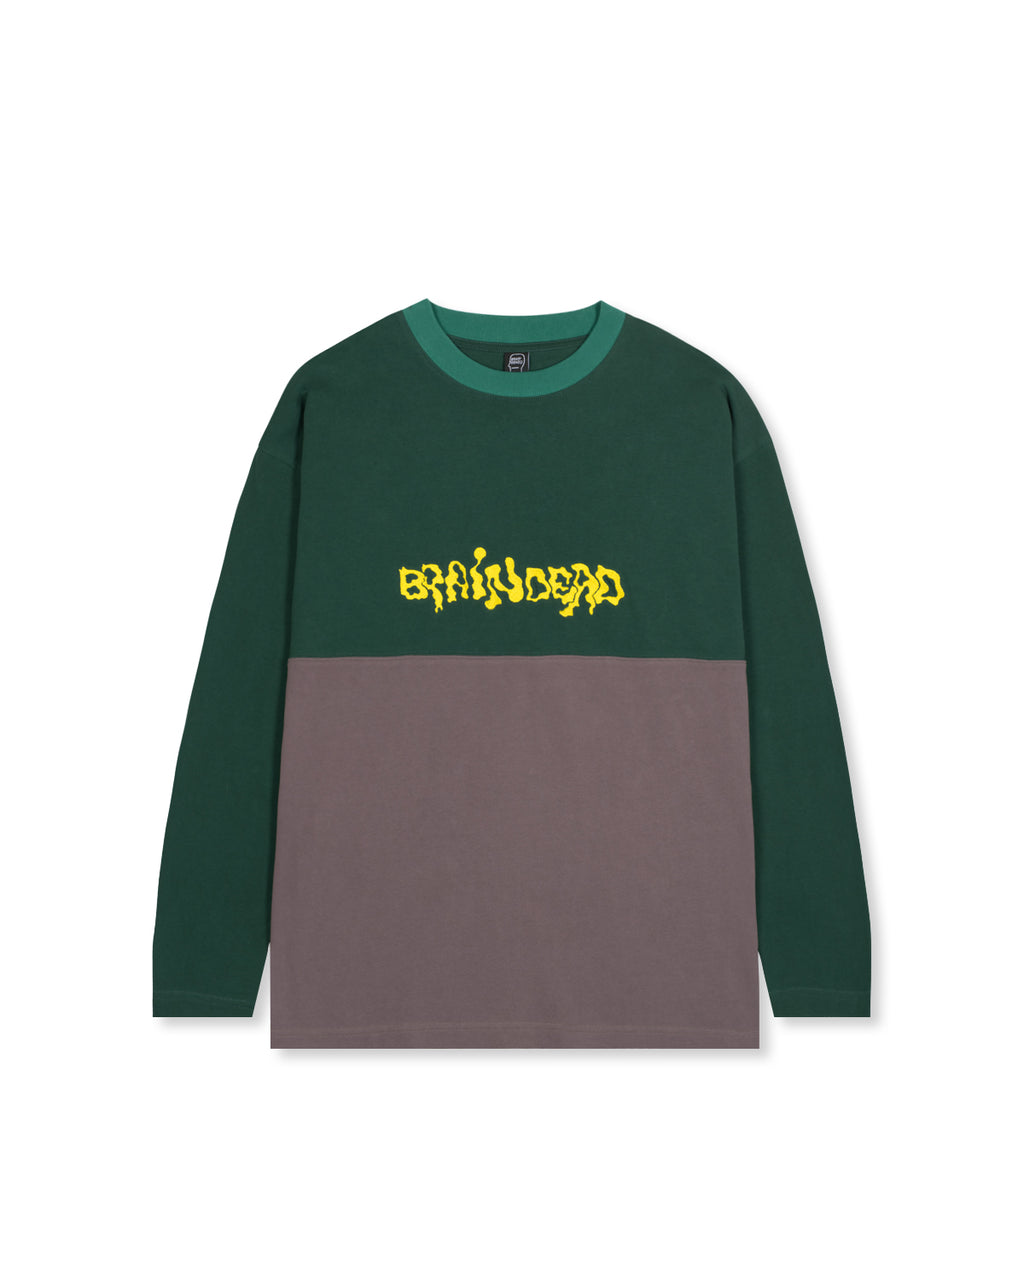 Embroidered Long Sleeve Football Shirt - Forest Green